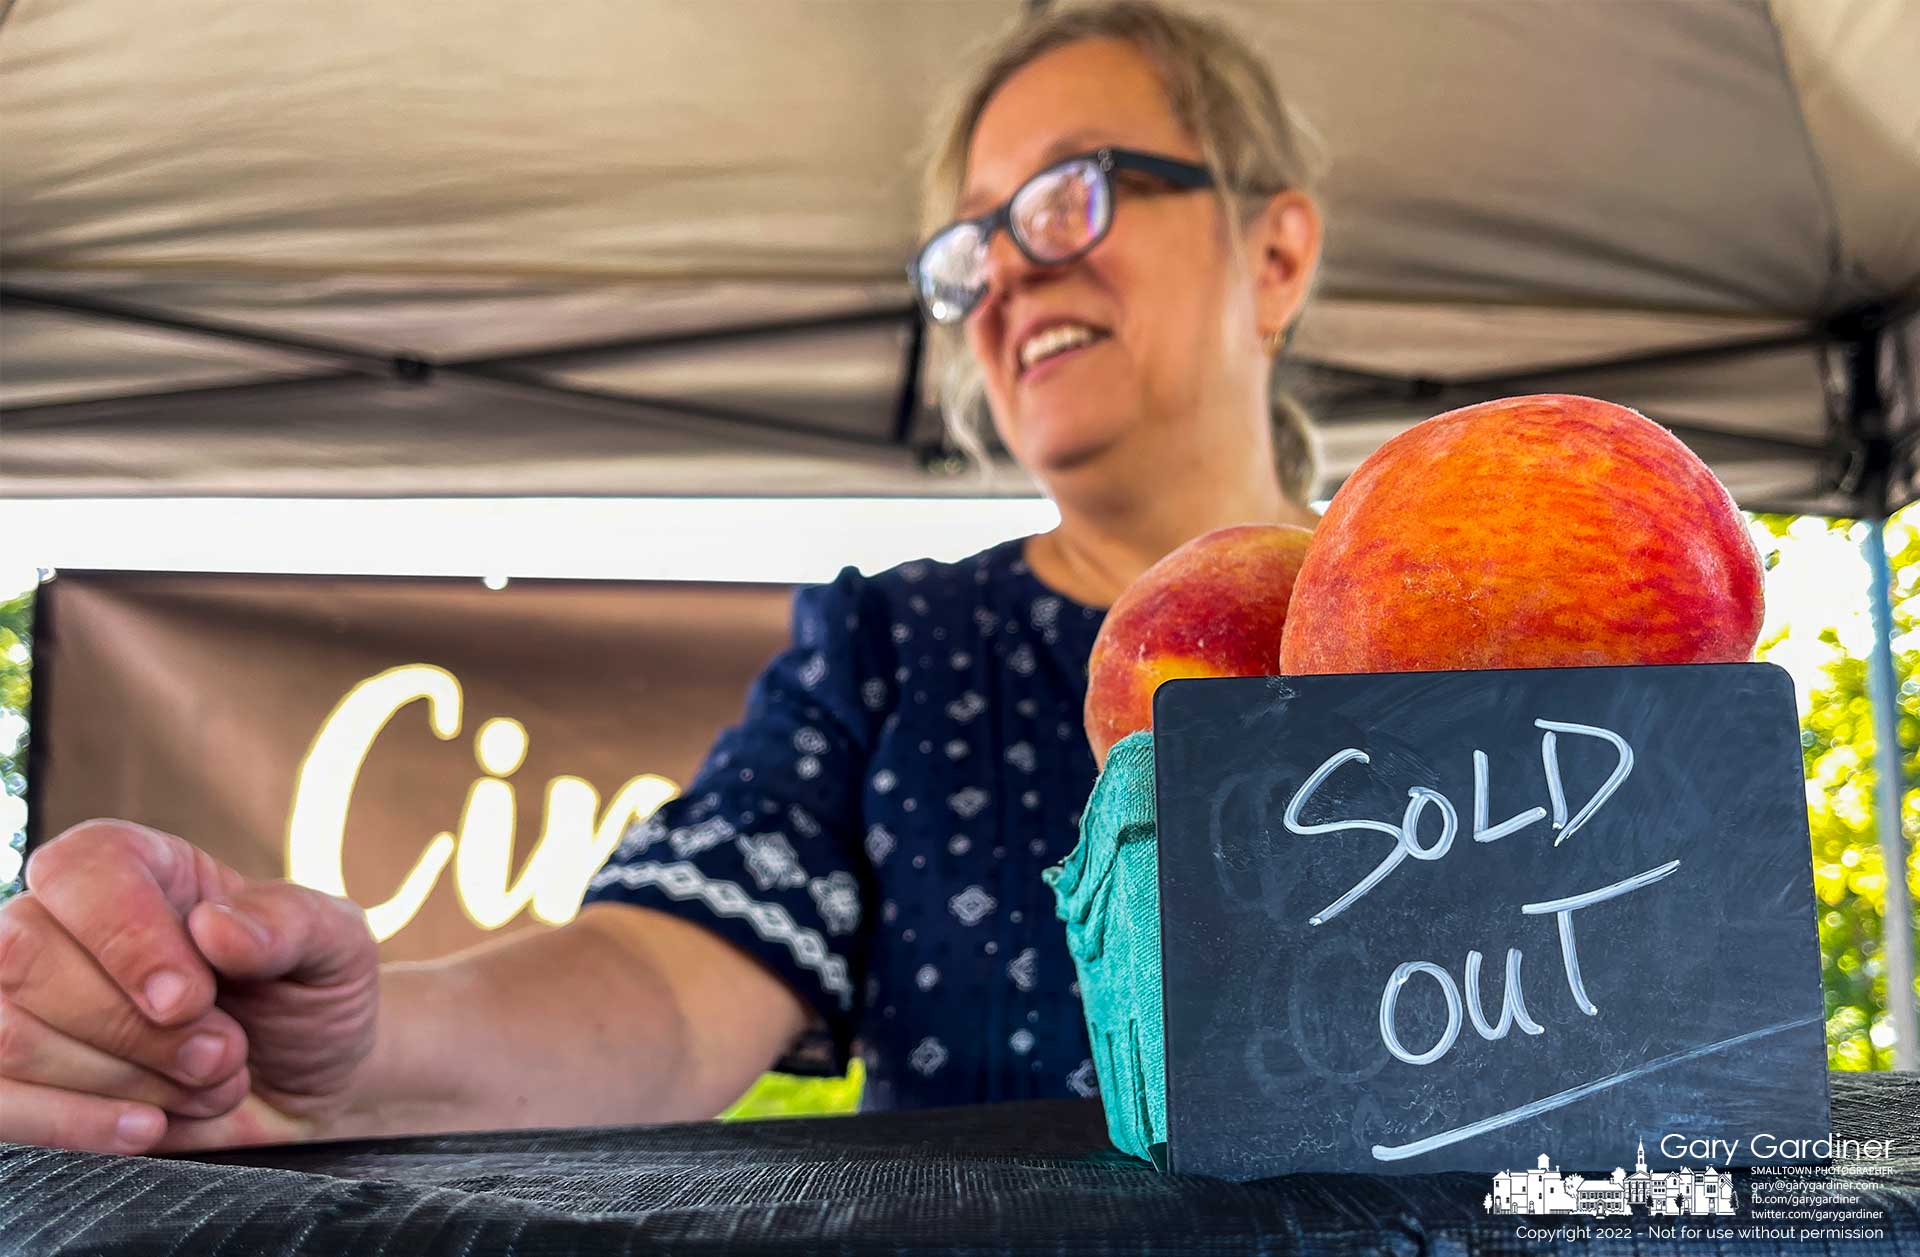 A cinnamon bun baker uses a neighborsvendors fruit and display box to hold up her "Sold Out" chalkboard less than halfway through the Saturday Farmer's Market. Several vendors sold out early with the large crowd arriving early in the morning. My Final Photo for August 27, 2022.